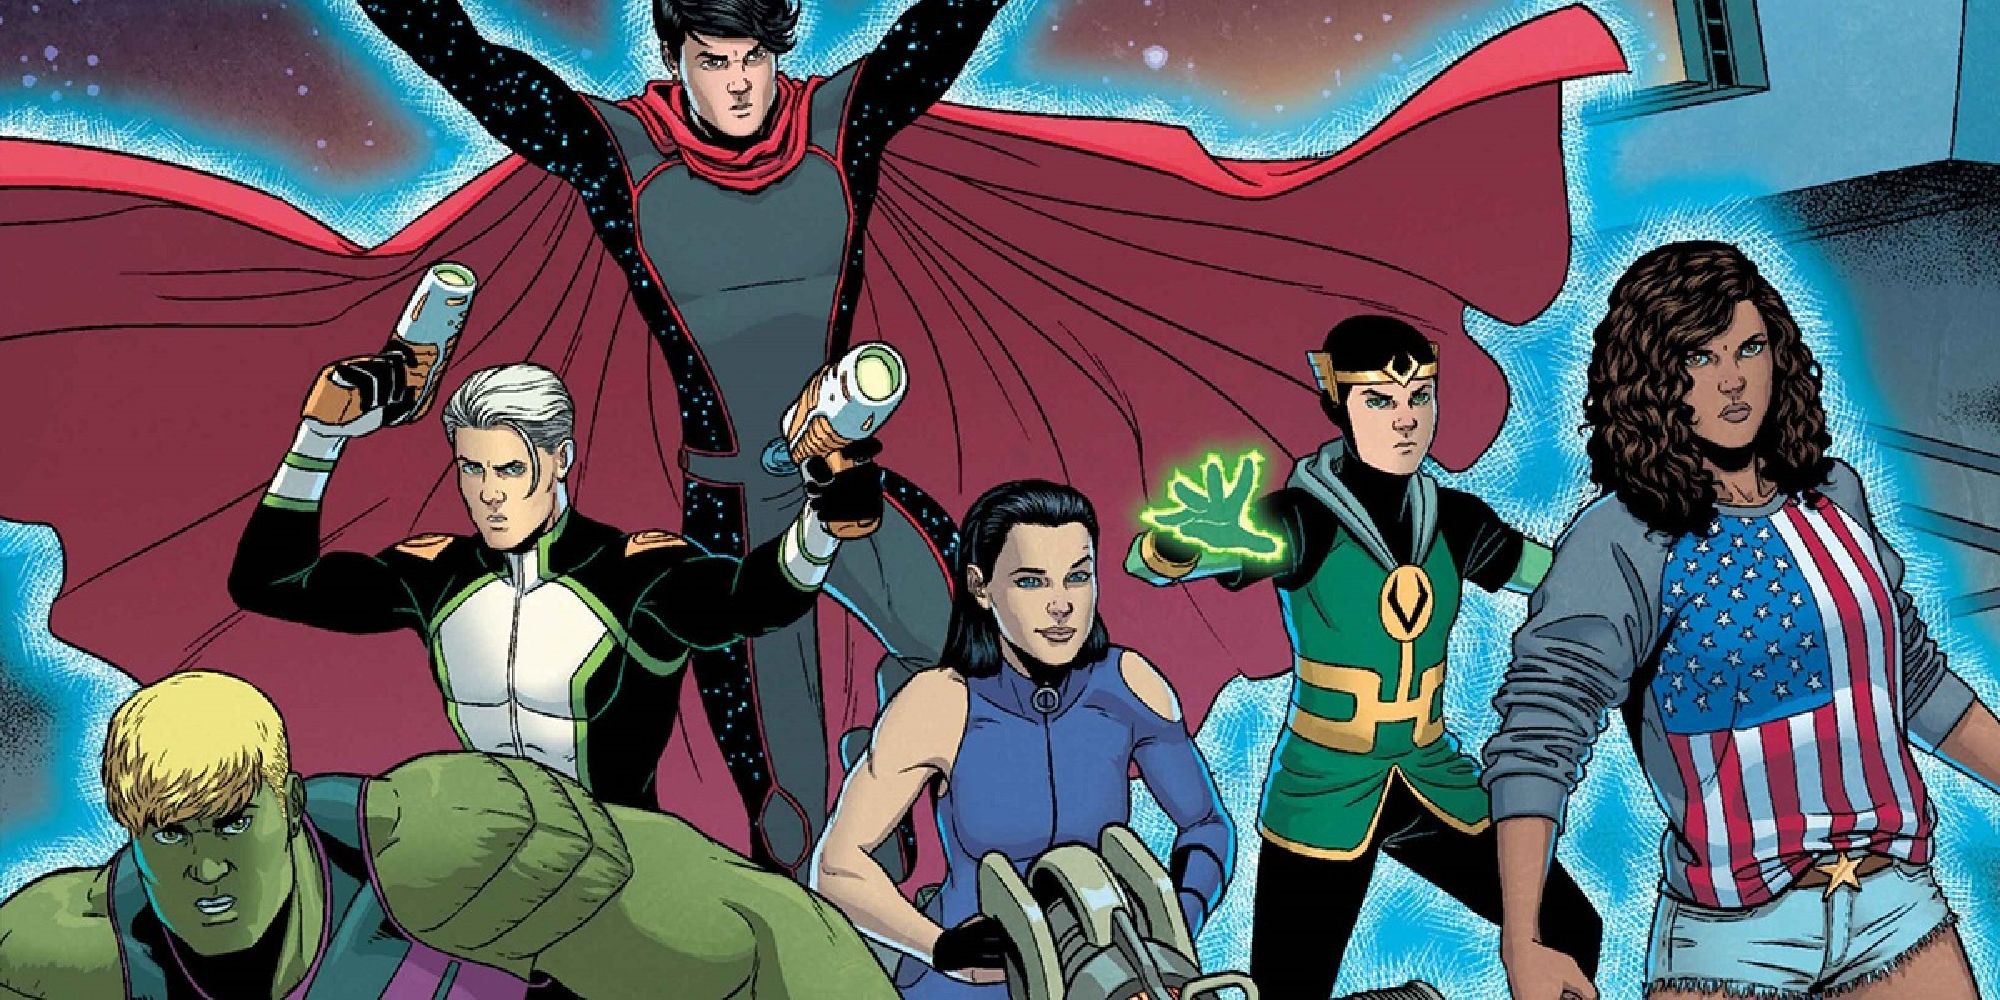 America as part of the young Avengers with Hulkling, Kate Bishop, Loki, Speed, and Wiccan